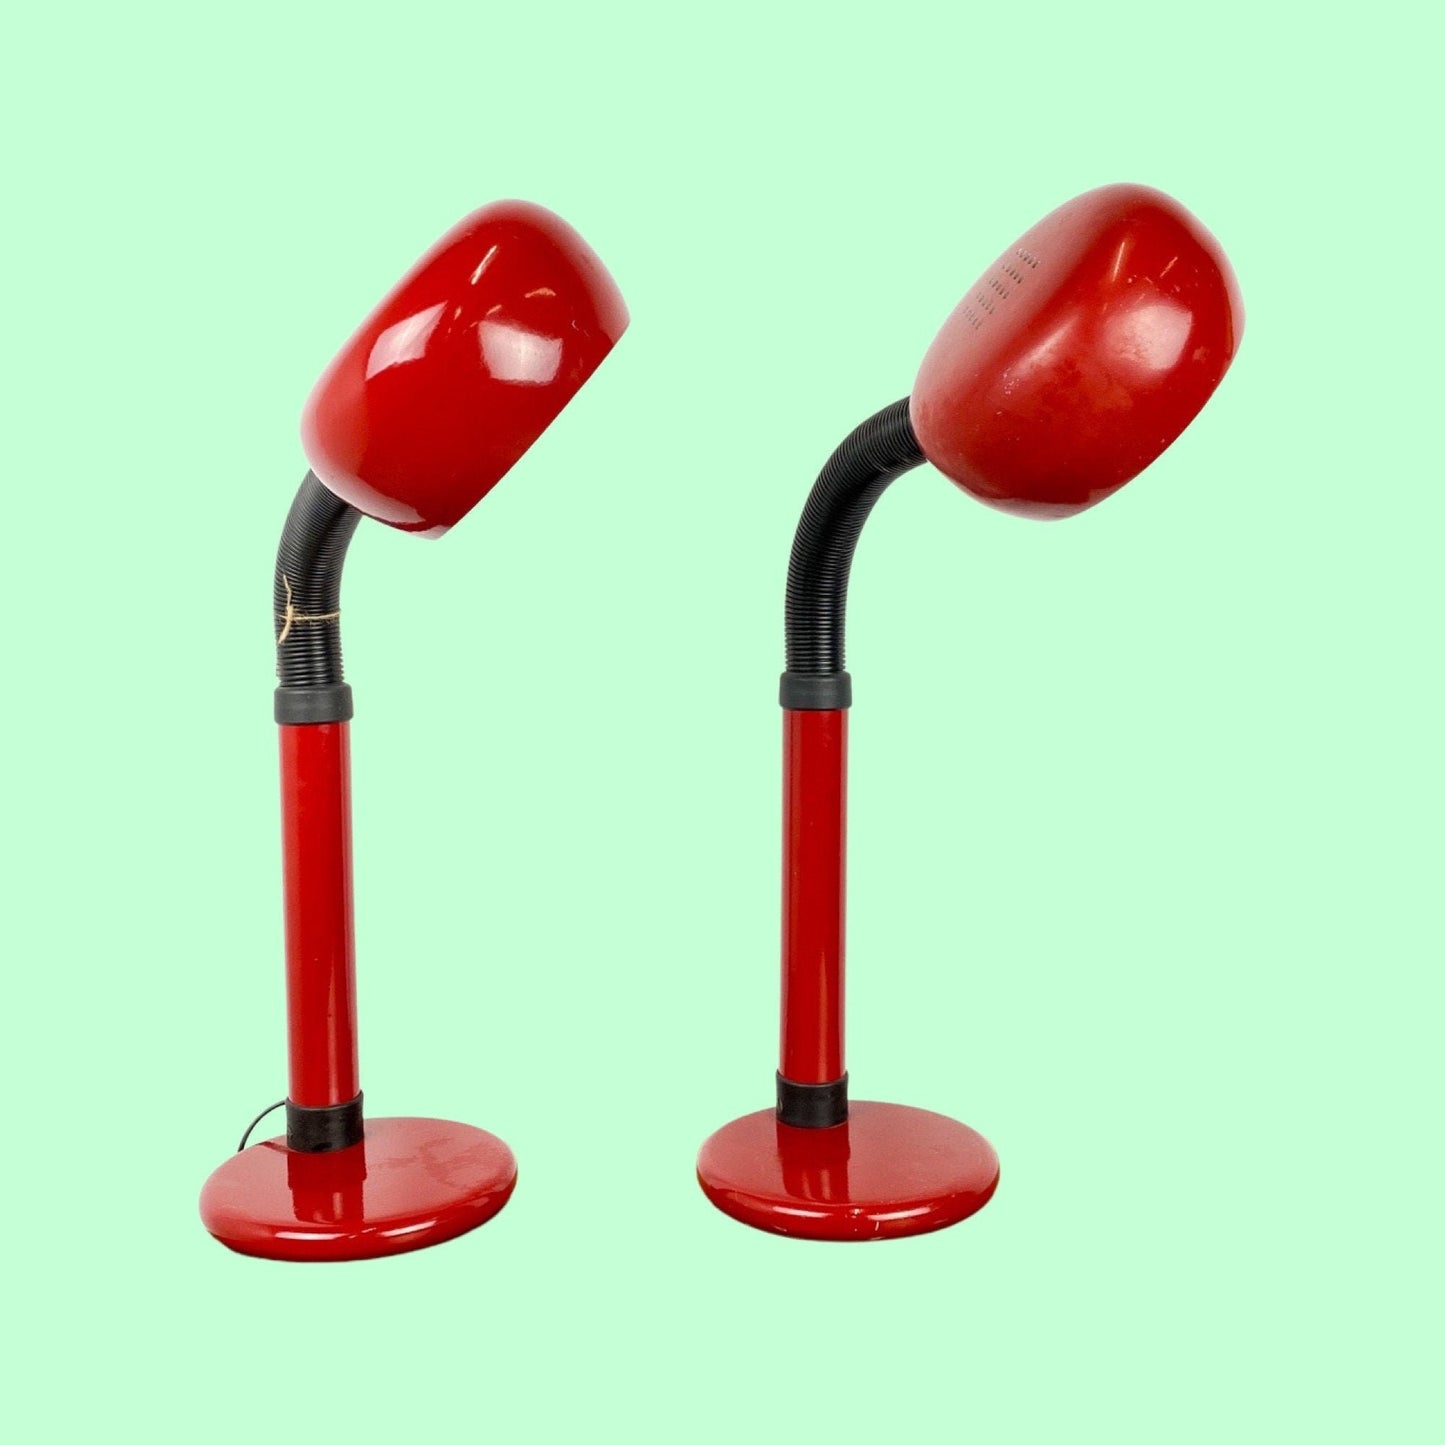 60s Red Desk Light | Vintage Table lighting From The Mid Century, 1960s | Bright Red Adjustable Desk Lamp | Height: 2.4 feet / 72 cm